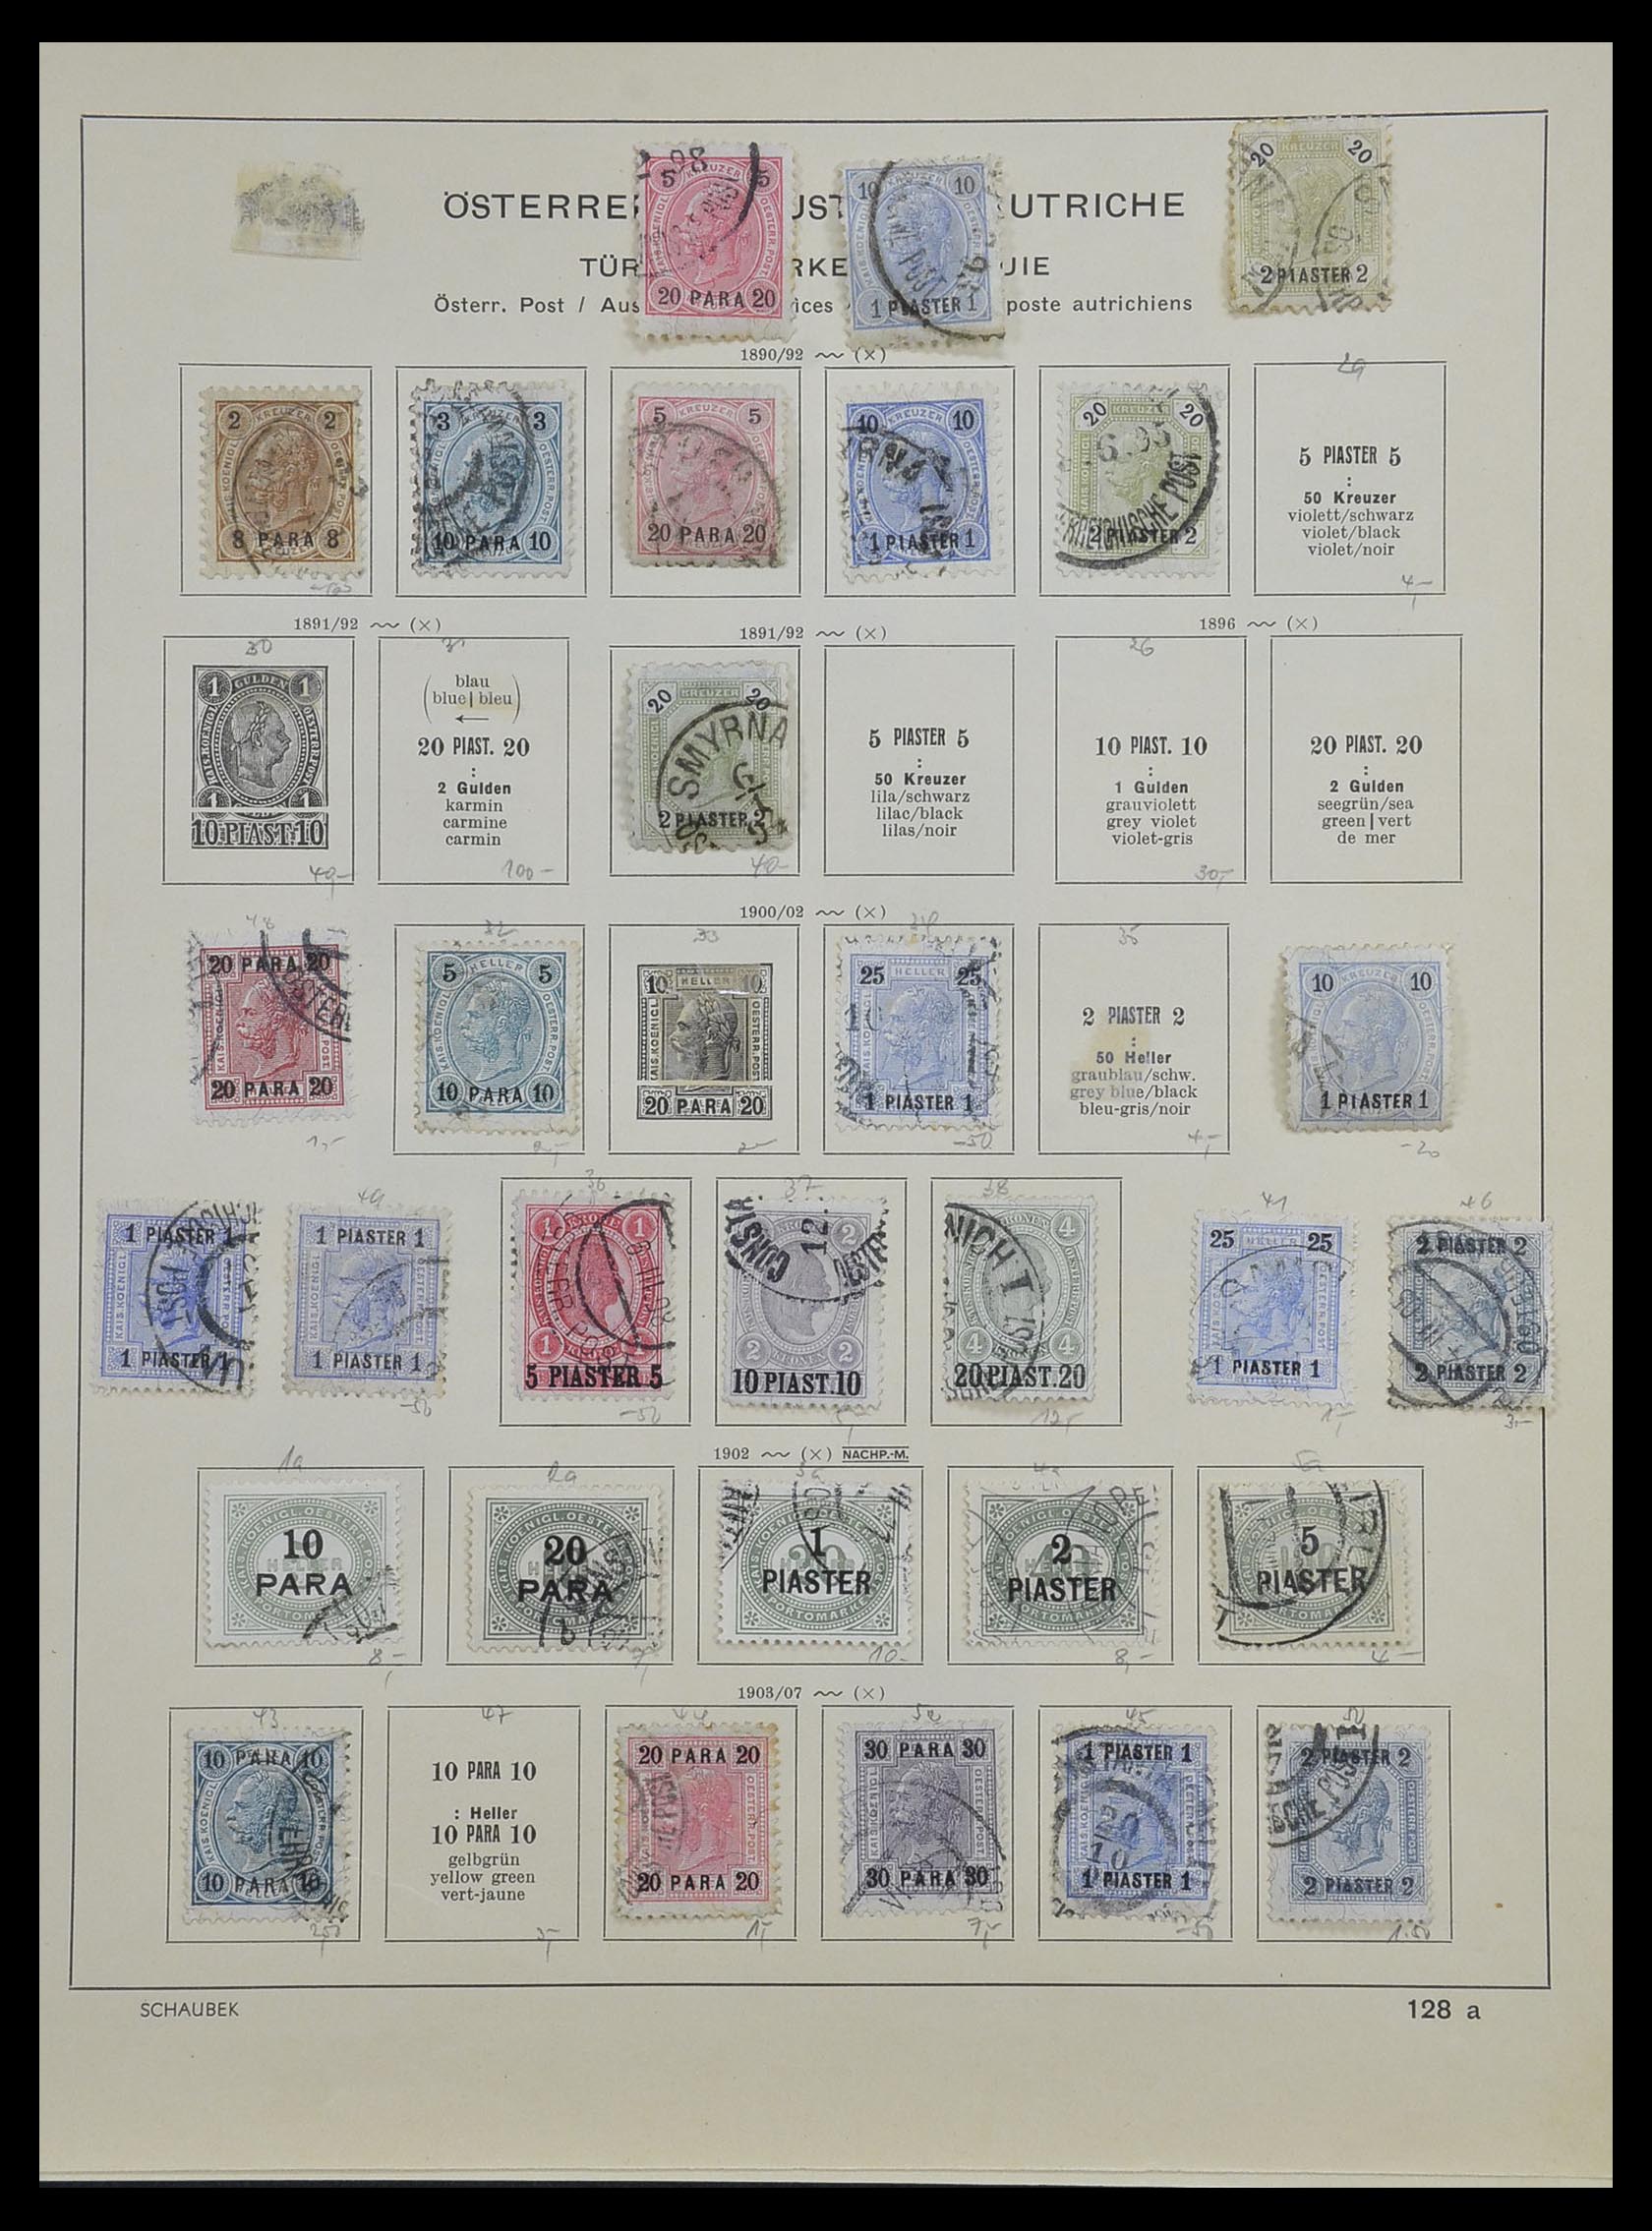 33594 043 - Stamp collection 33594 Austria and territories 1850-1918.